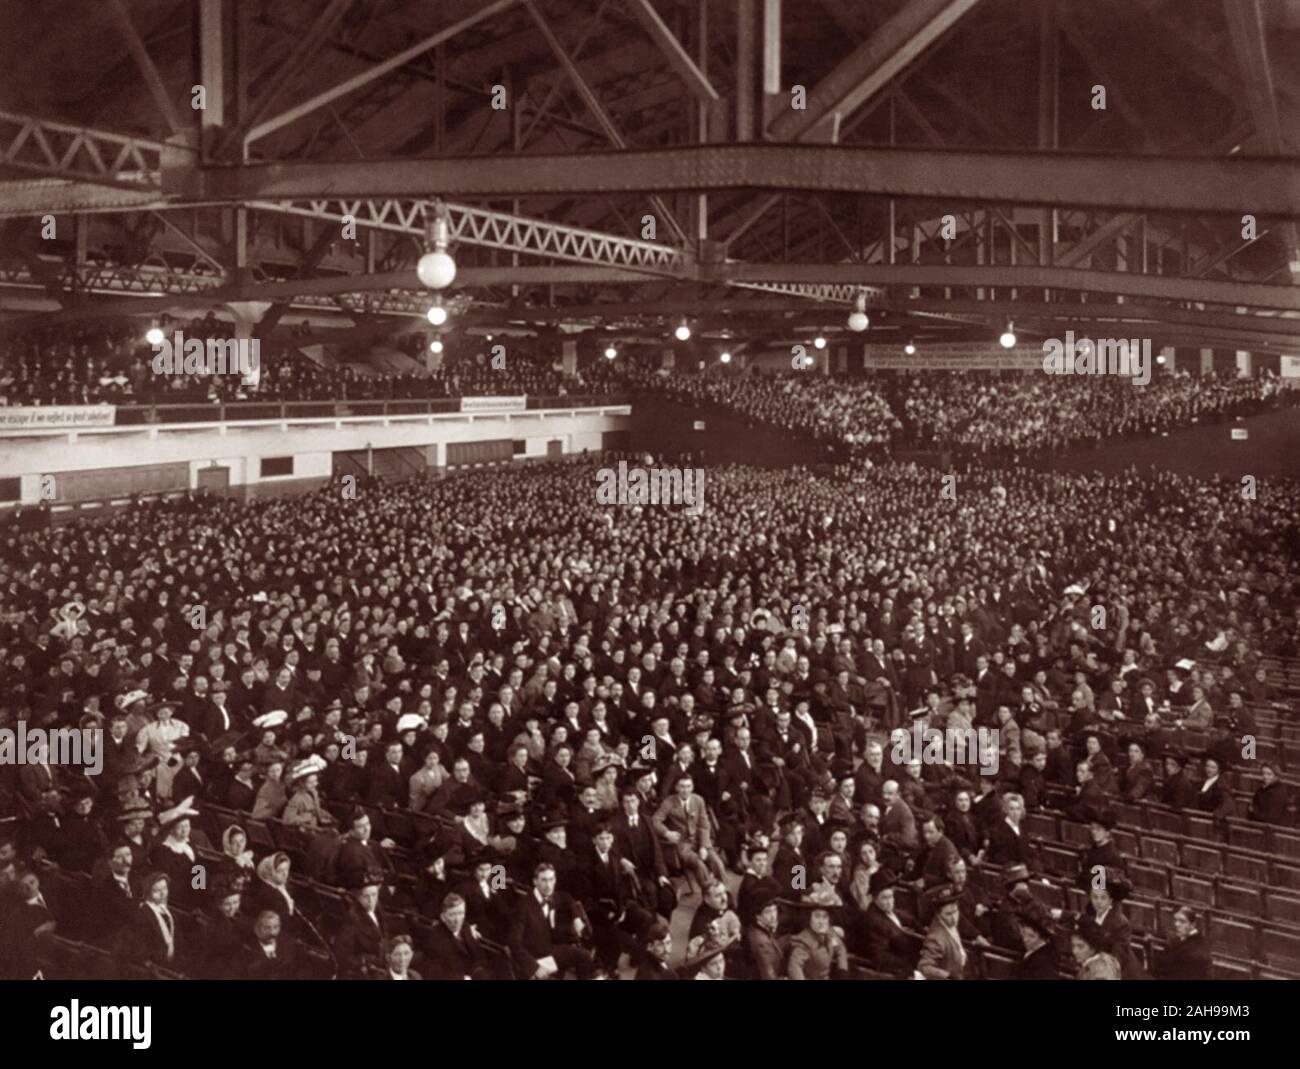 Gipsy Smith evangelistic revival meeting at the 7th Regiment Armory in Chicago, Illinois on October 13, 1909. Stock Photo